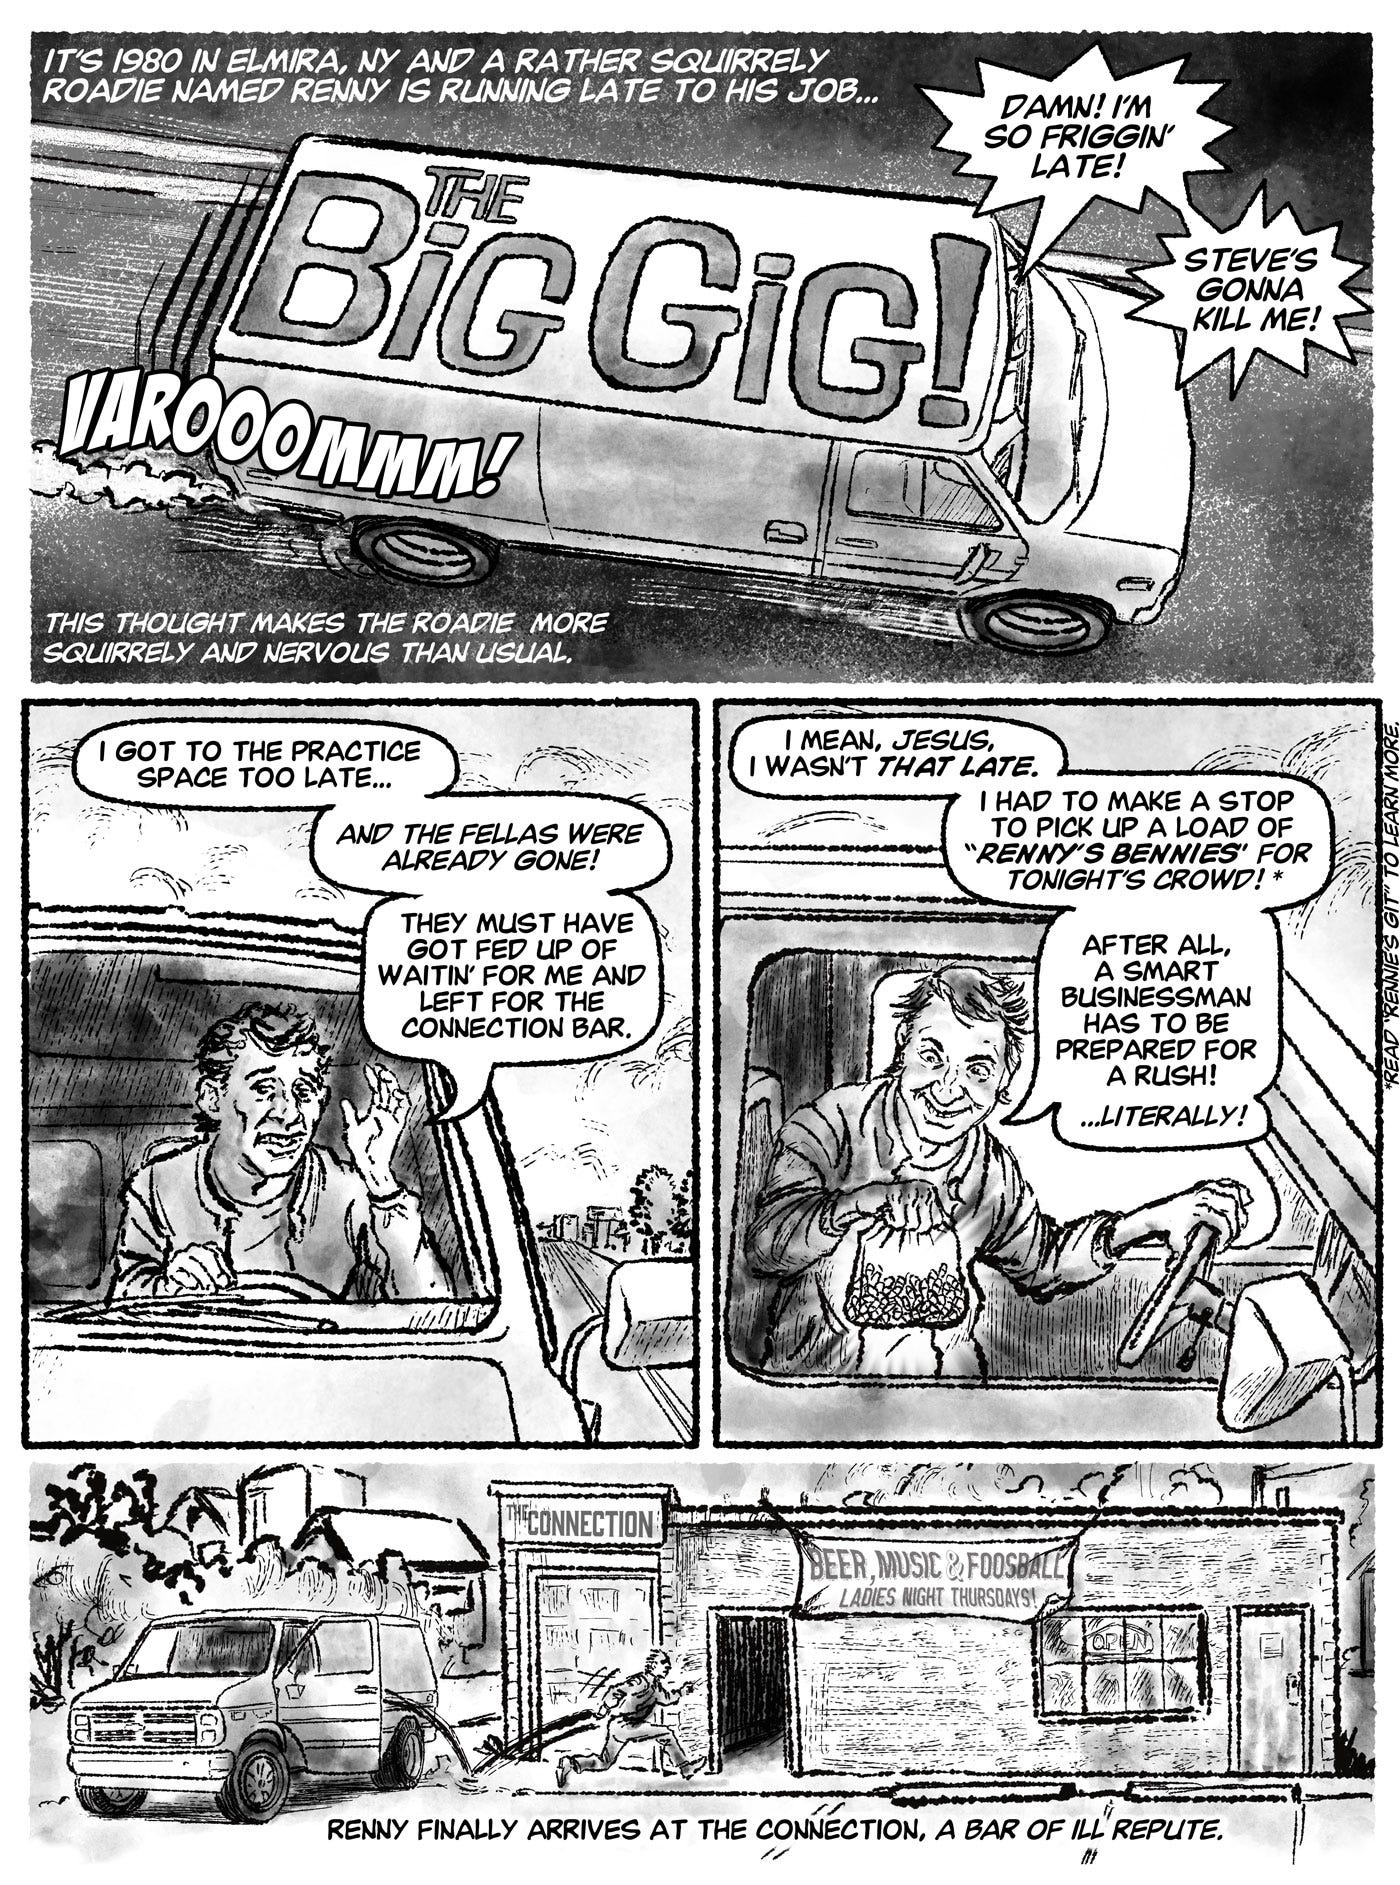 The Big Gig Page 1 comic by ER Flynn